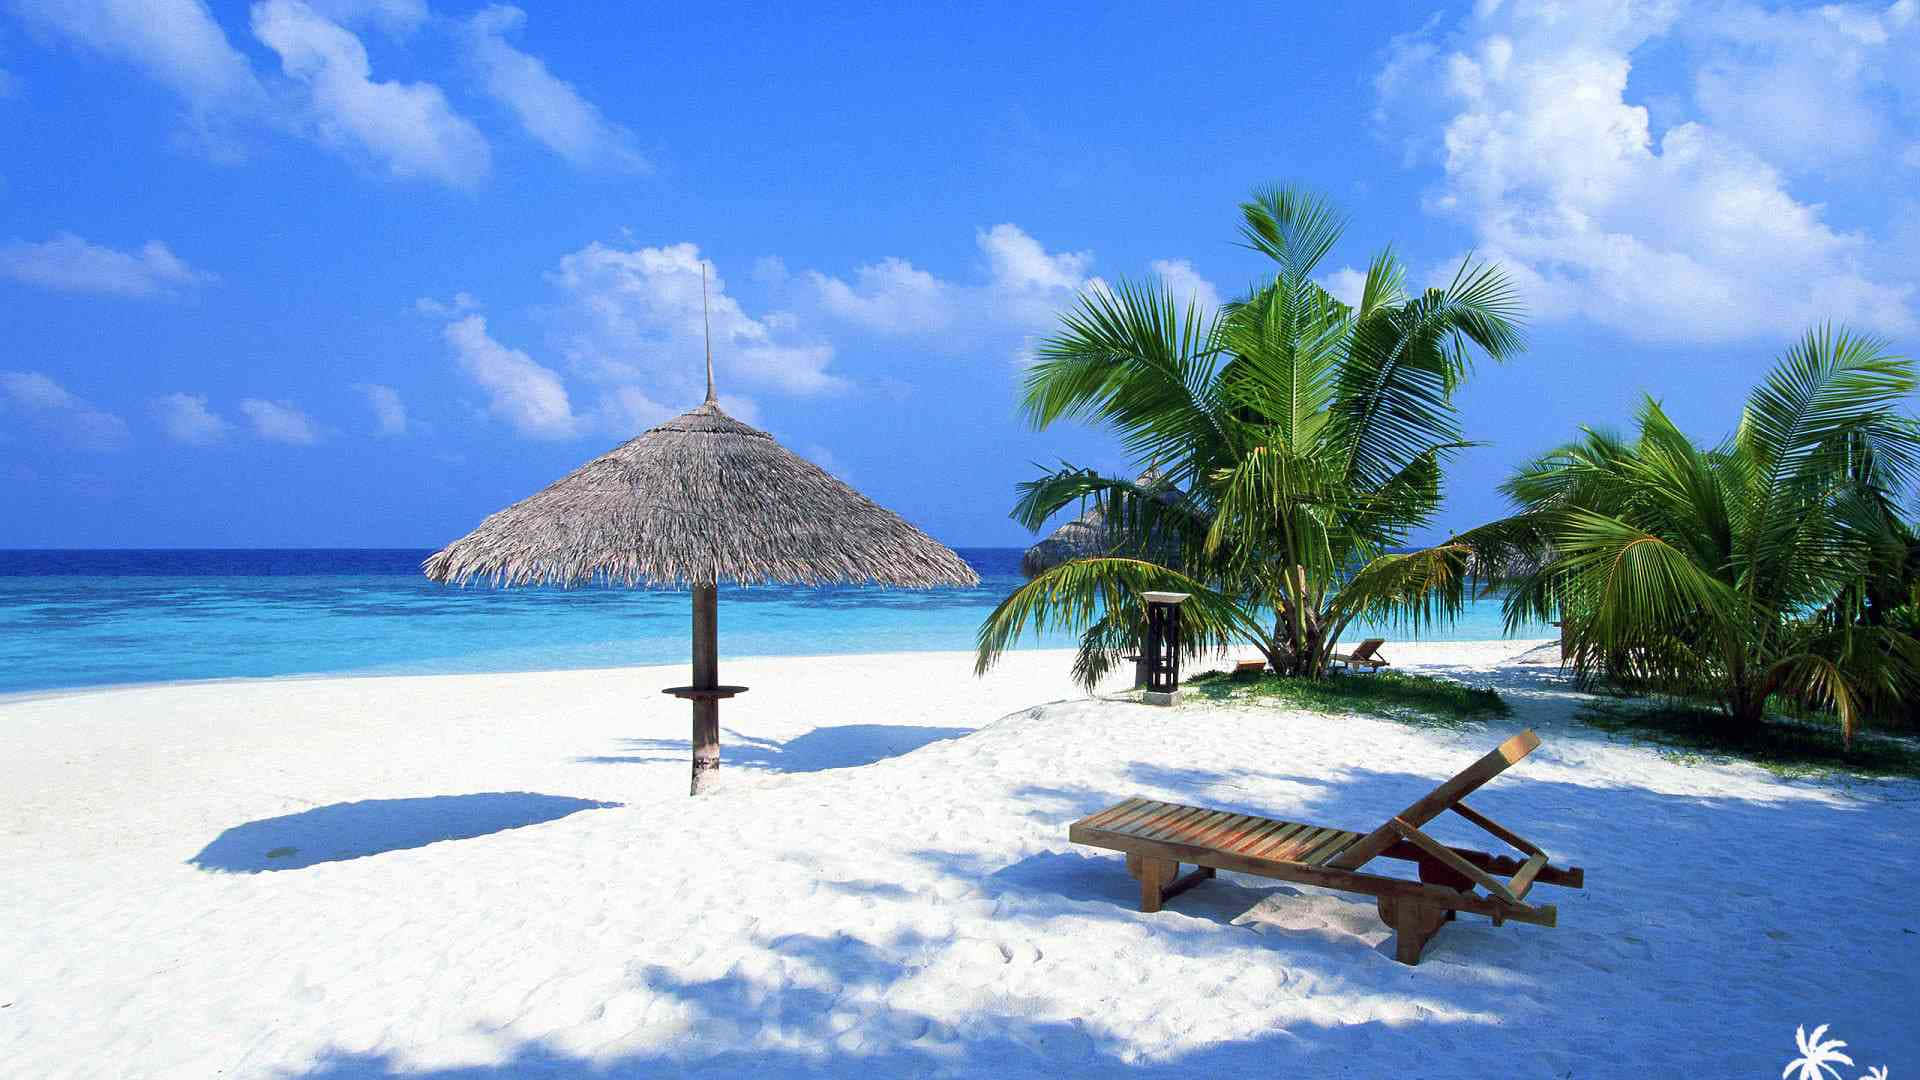 A Beautiful And Serene Beach With All Its Natural Wonders. Background